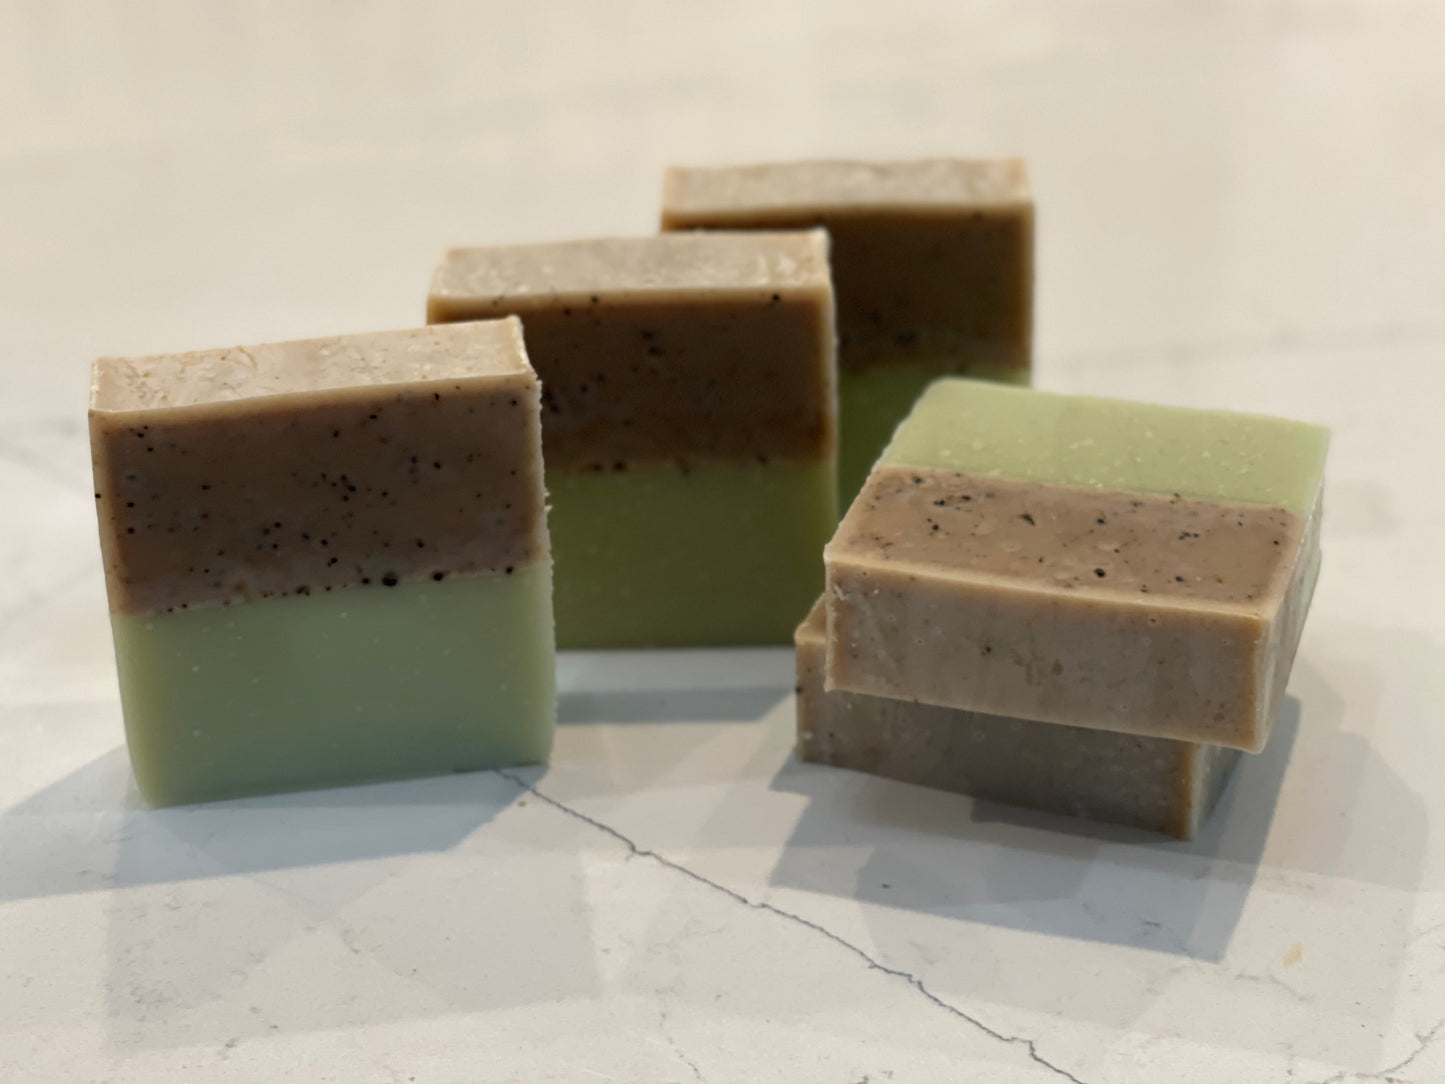 Menthol Eucalyptus Handmade Luxury Soap made with caffeine and real menthol